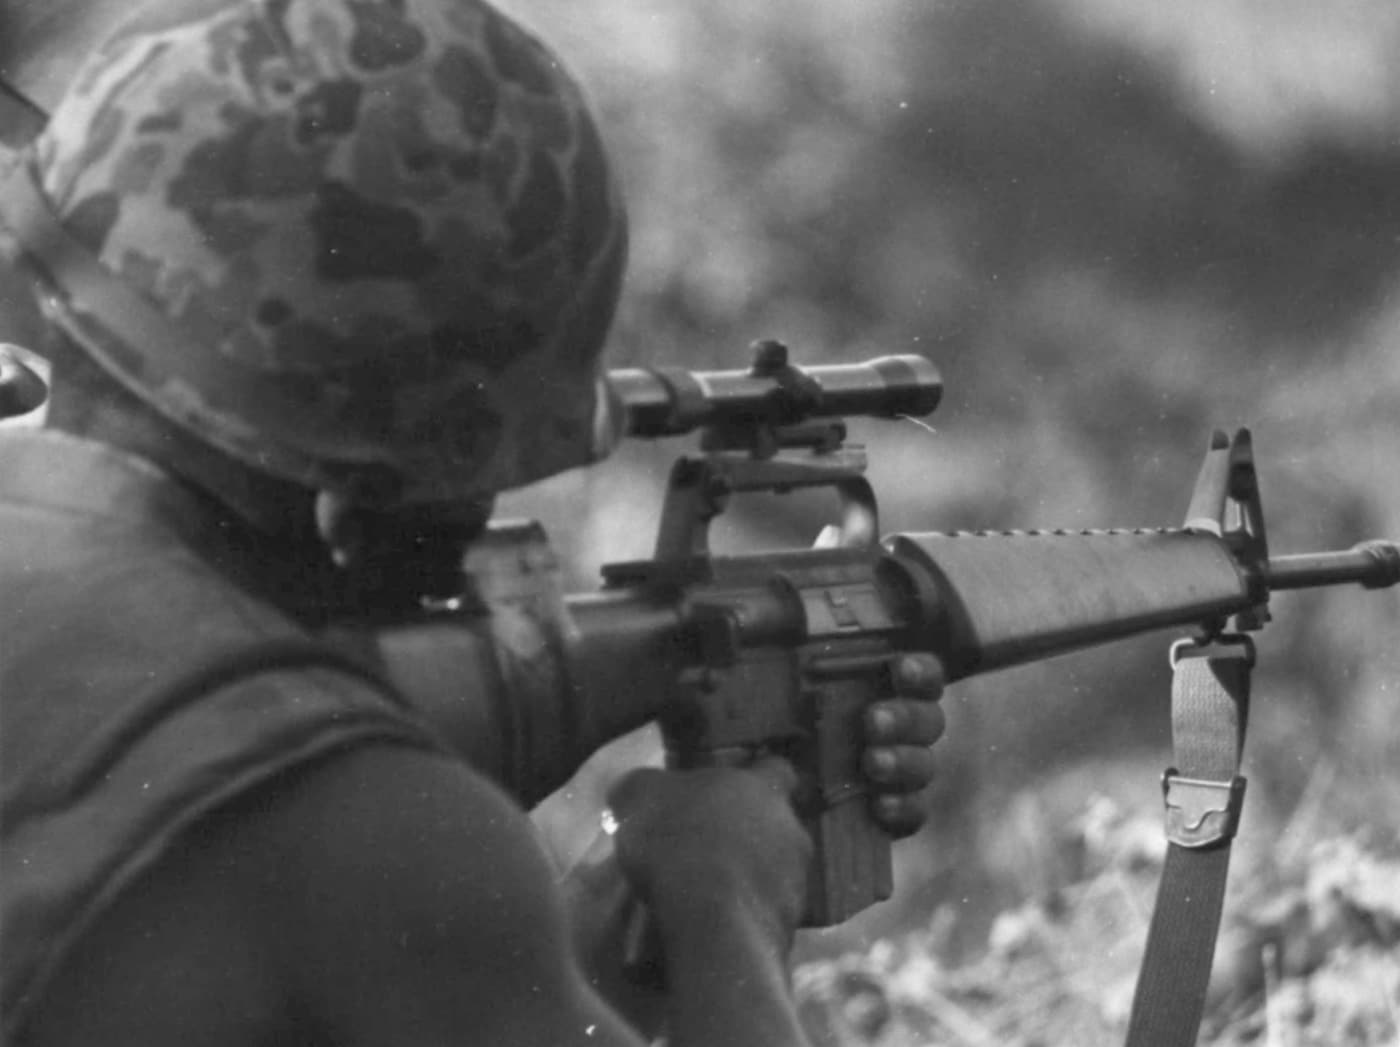 This is a rare image of a Korean Marine sniper in Vietnam. His M16A1 is fitted with a rifle scope and a square forward assist. The image shows him aiming from over his right shoulder. The photo was taken in 1967 during Operation Dragon Fire on Batangan Peninsula.